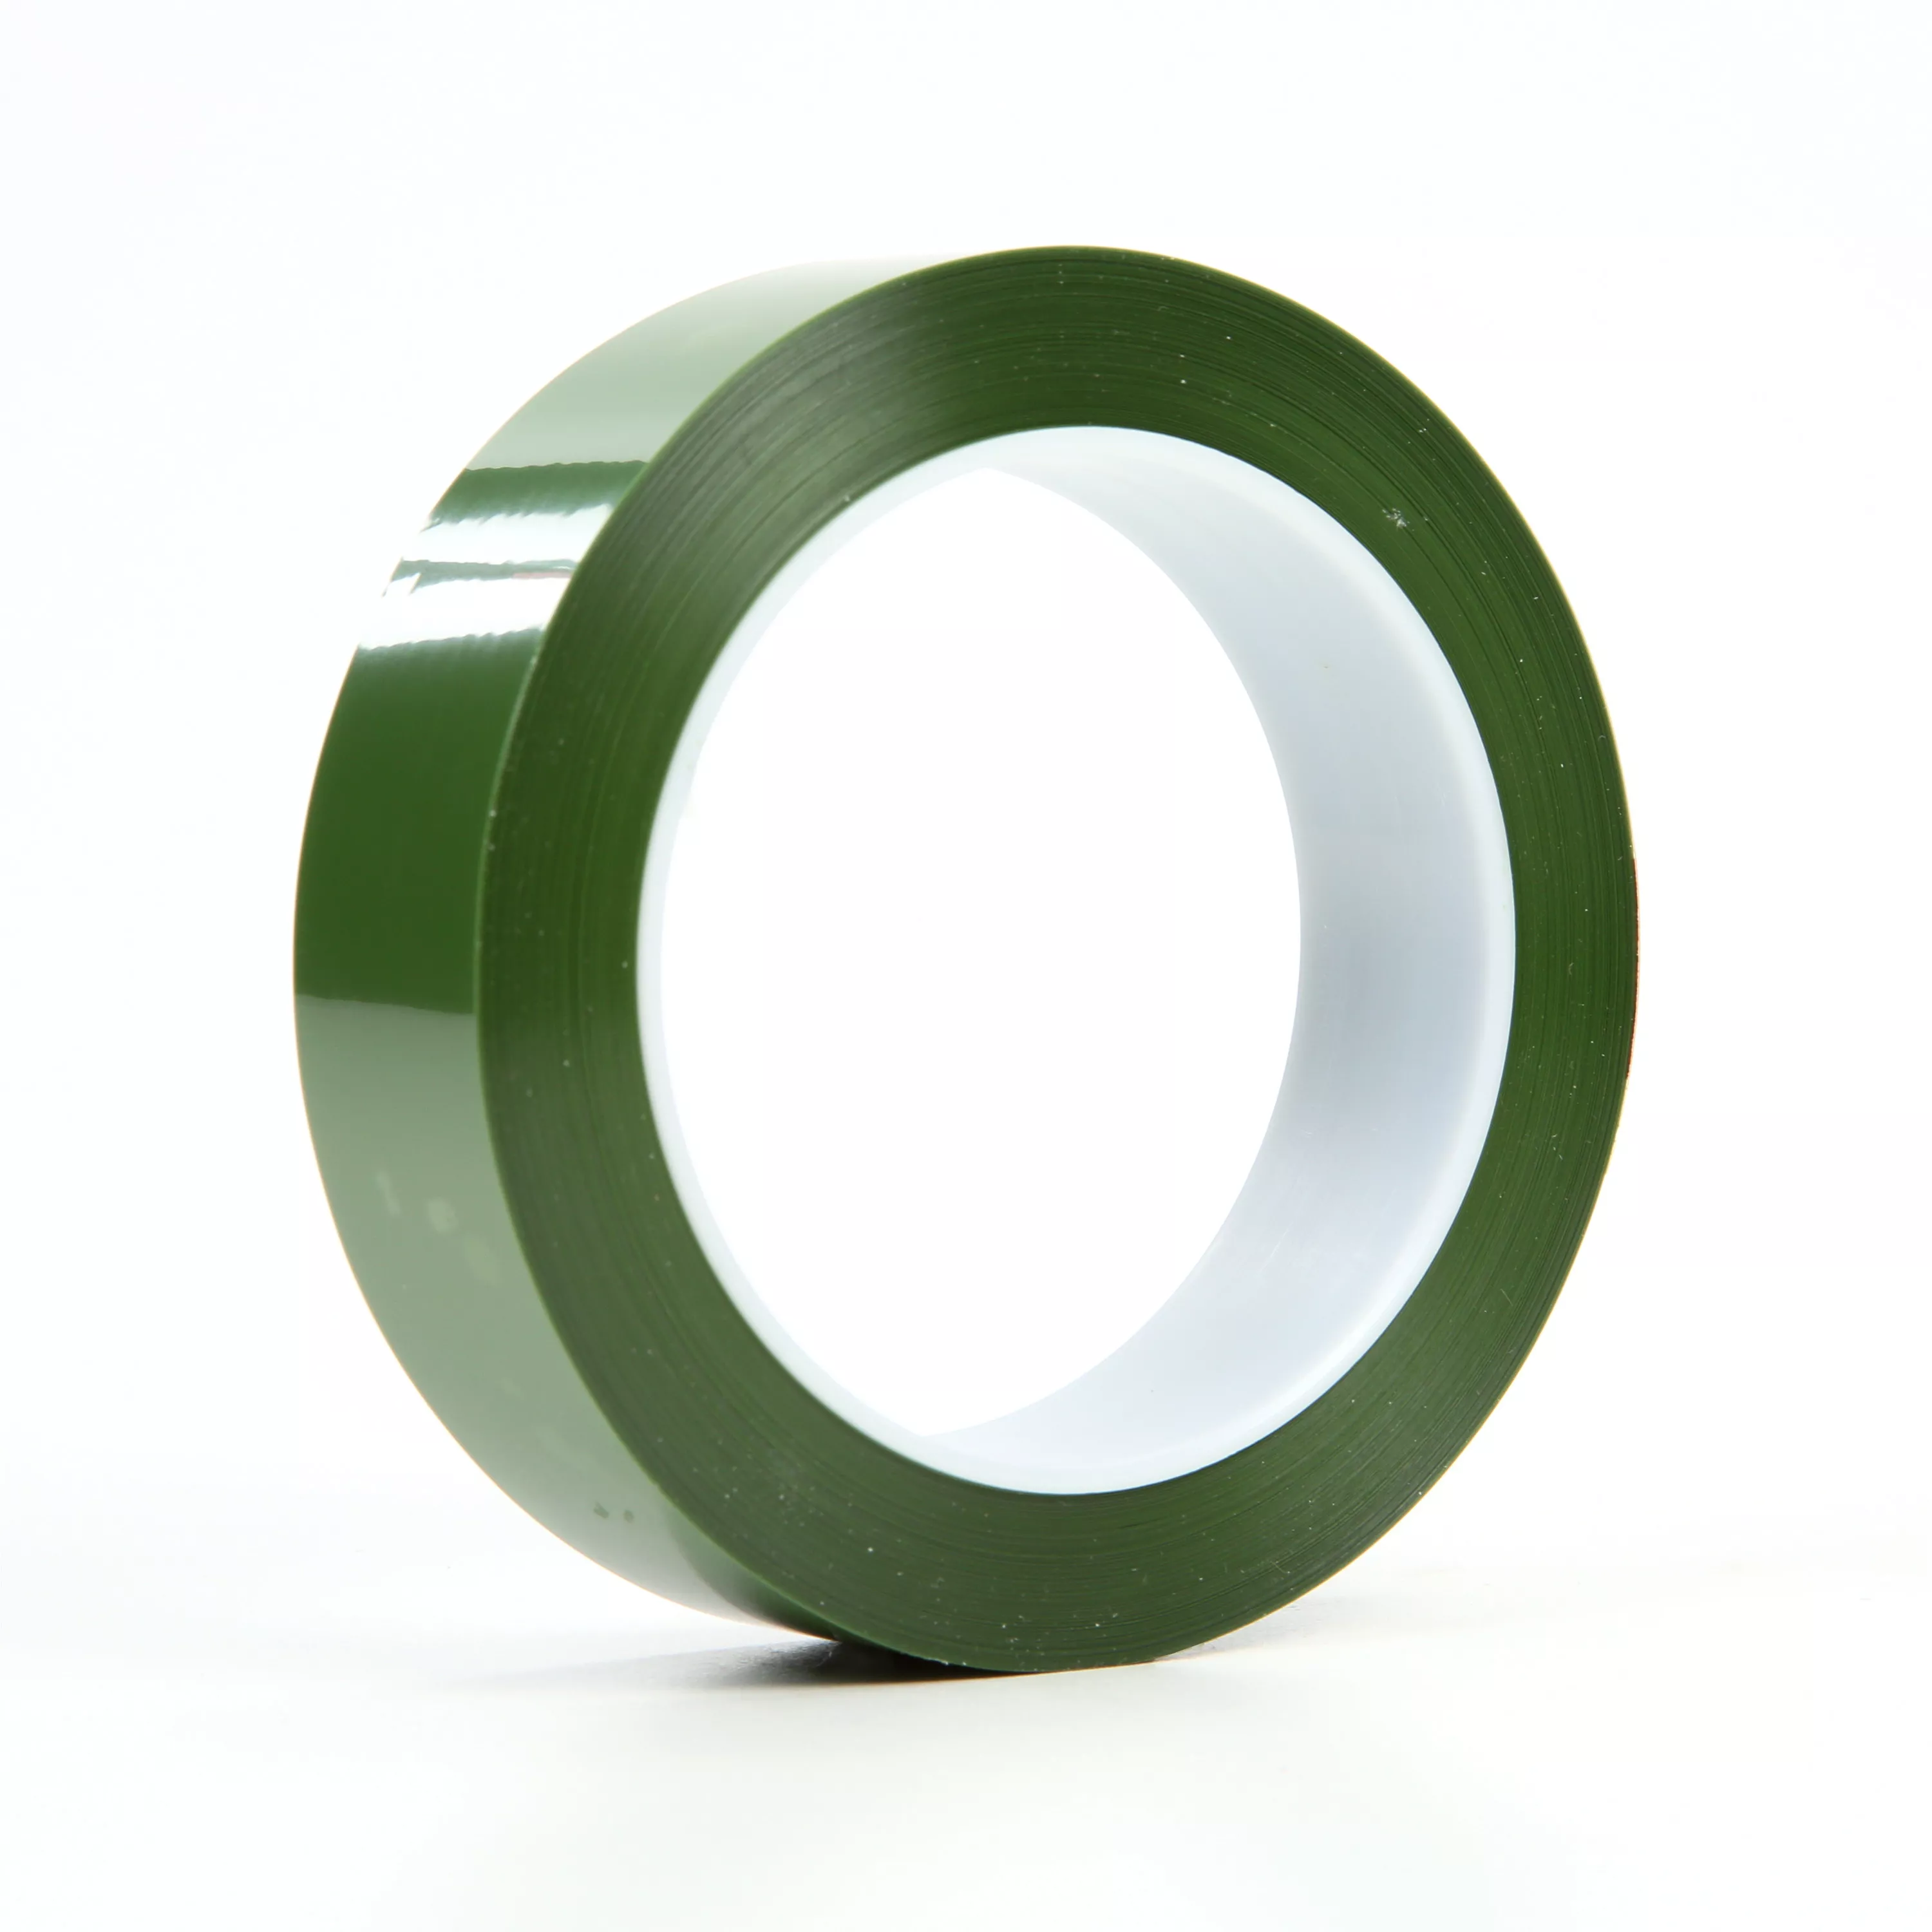 3M™ Polyester Tape 8403, Green, 1 in x 72 yd, 2.4 mil, 36 Roll/Case